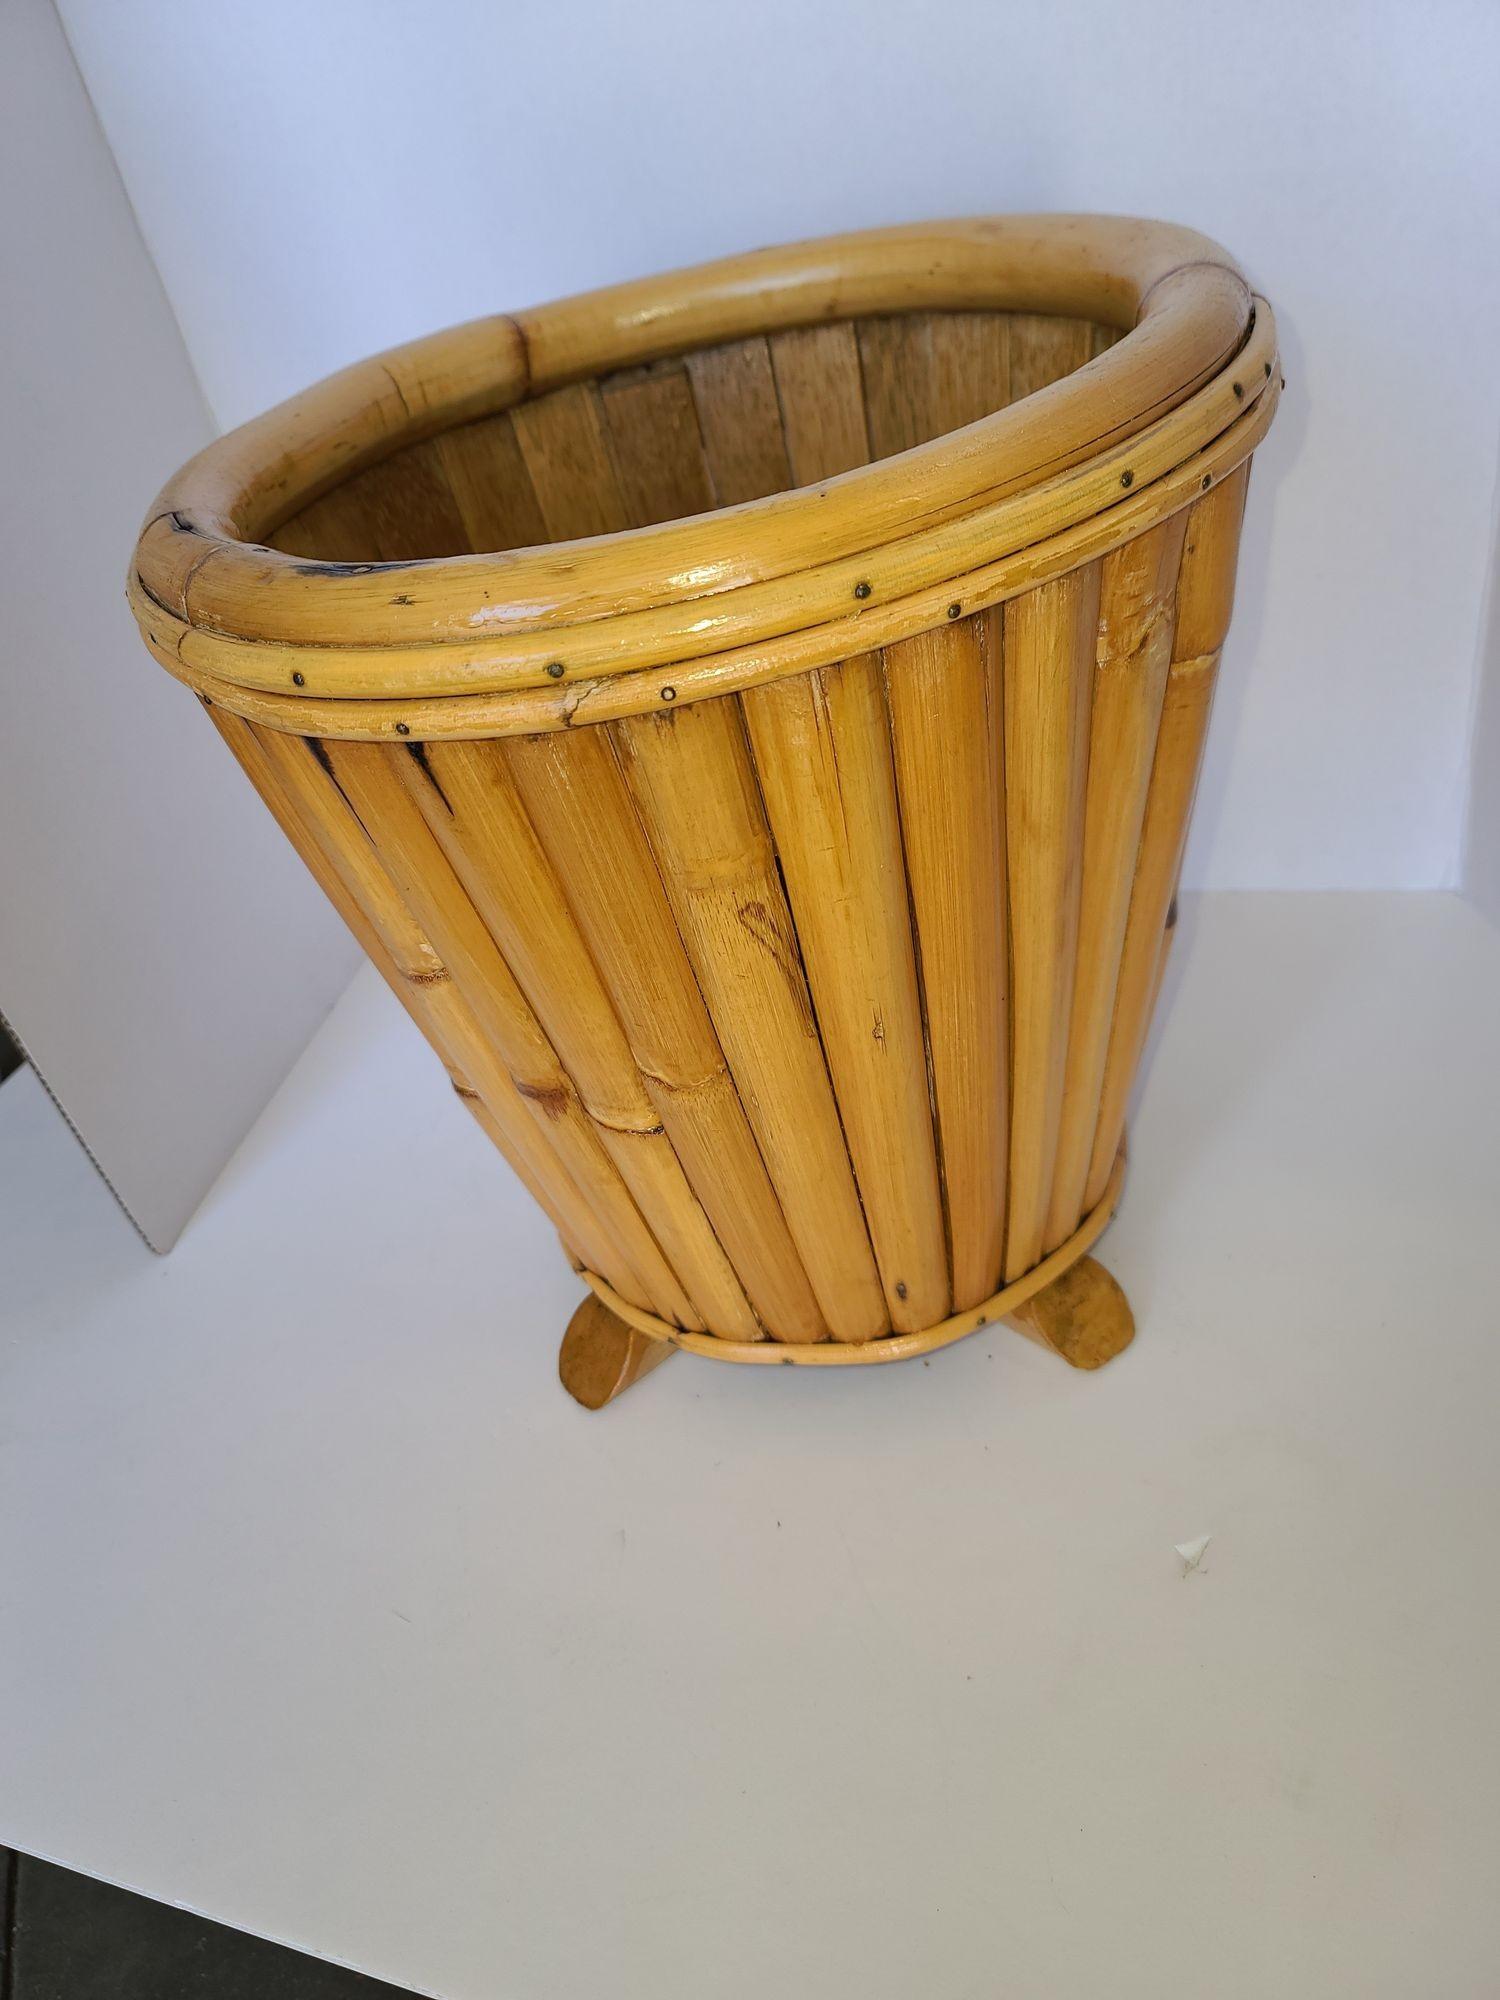 Original Paul Frankl rattan wastebasket featuring a stacked rattan basket fixed to a mahogany base. This basket comes from a Paul Frankl house in Encino California. 

We only purchase and sell only the best and finest rattan furniture made by the